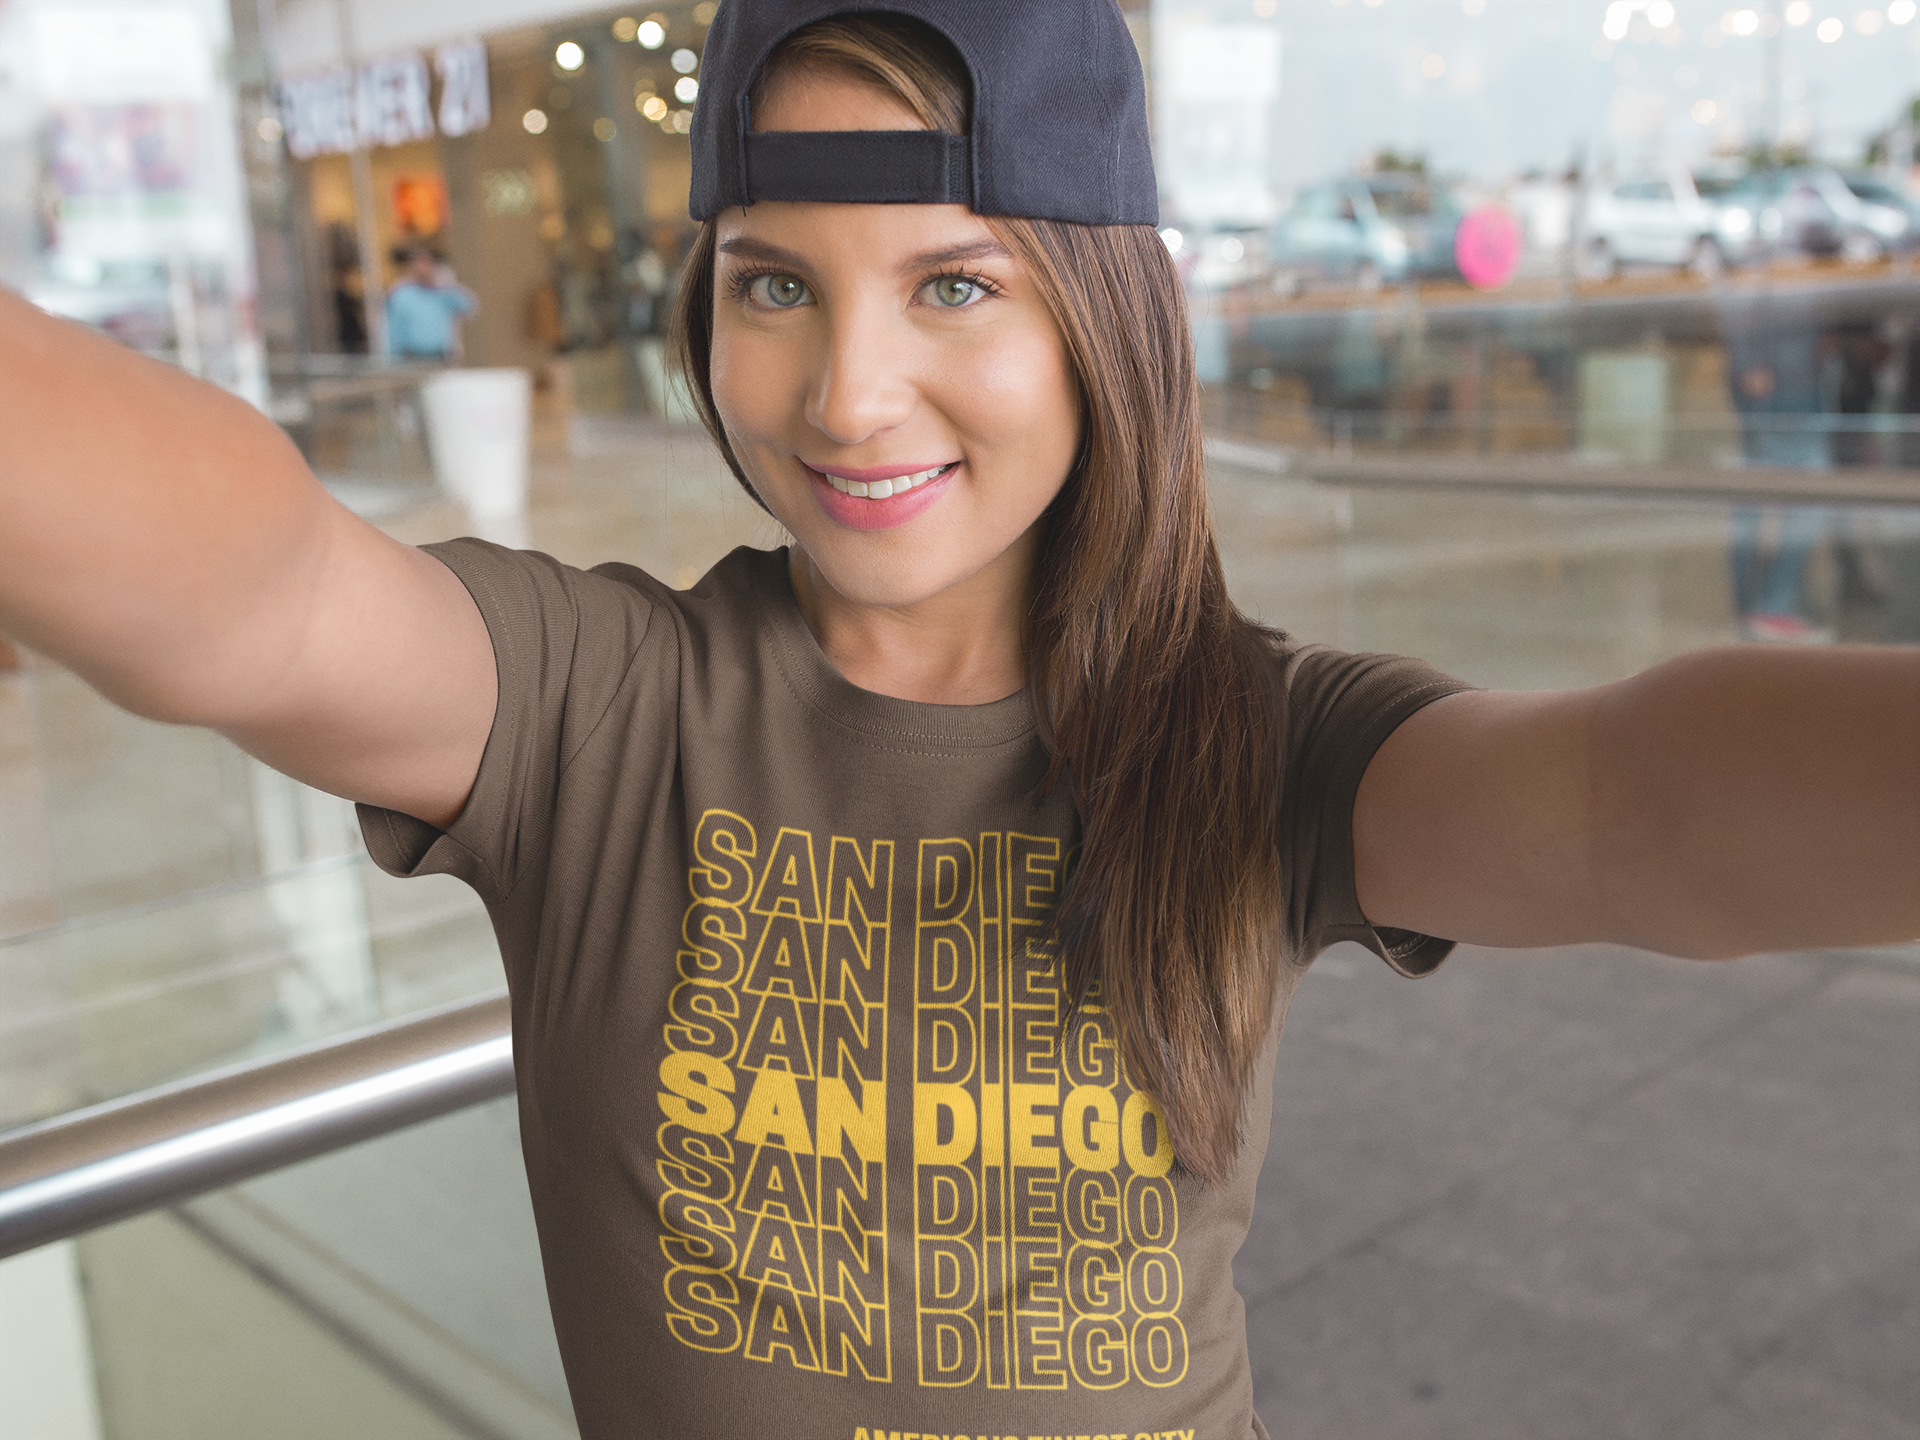 Smiling woman taking a selfie wearing a brown and gold San Diego t-shirt.